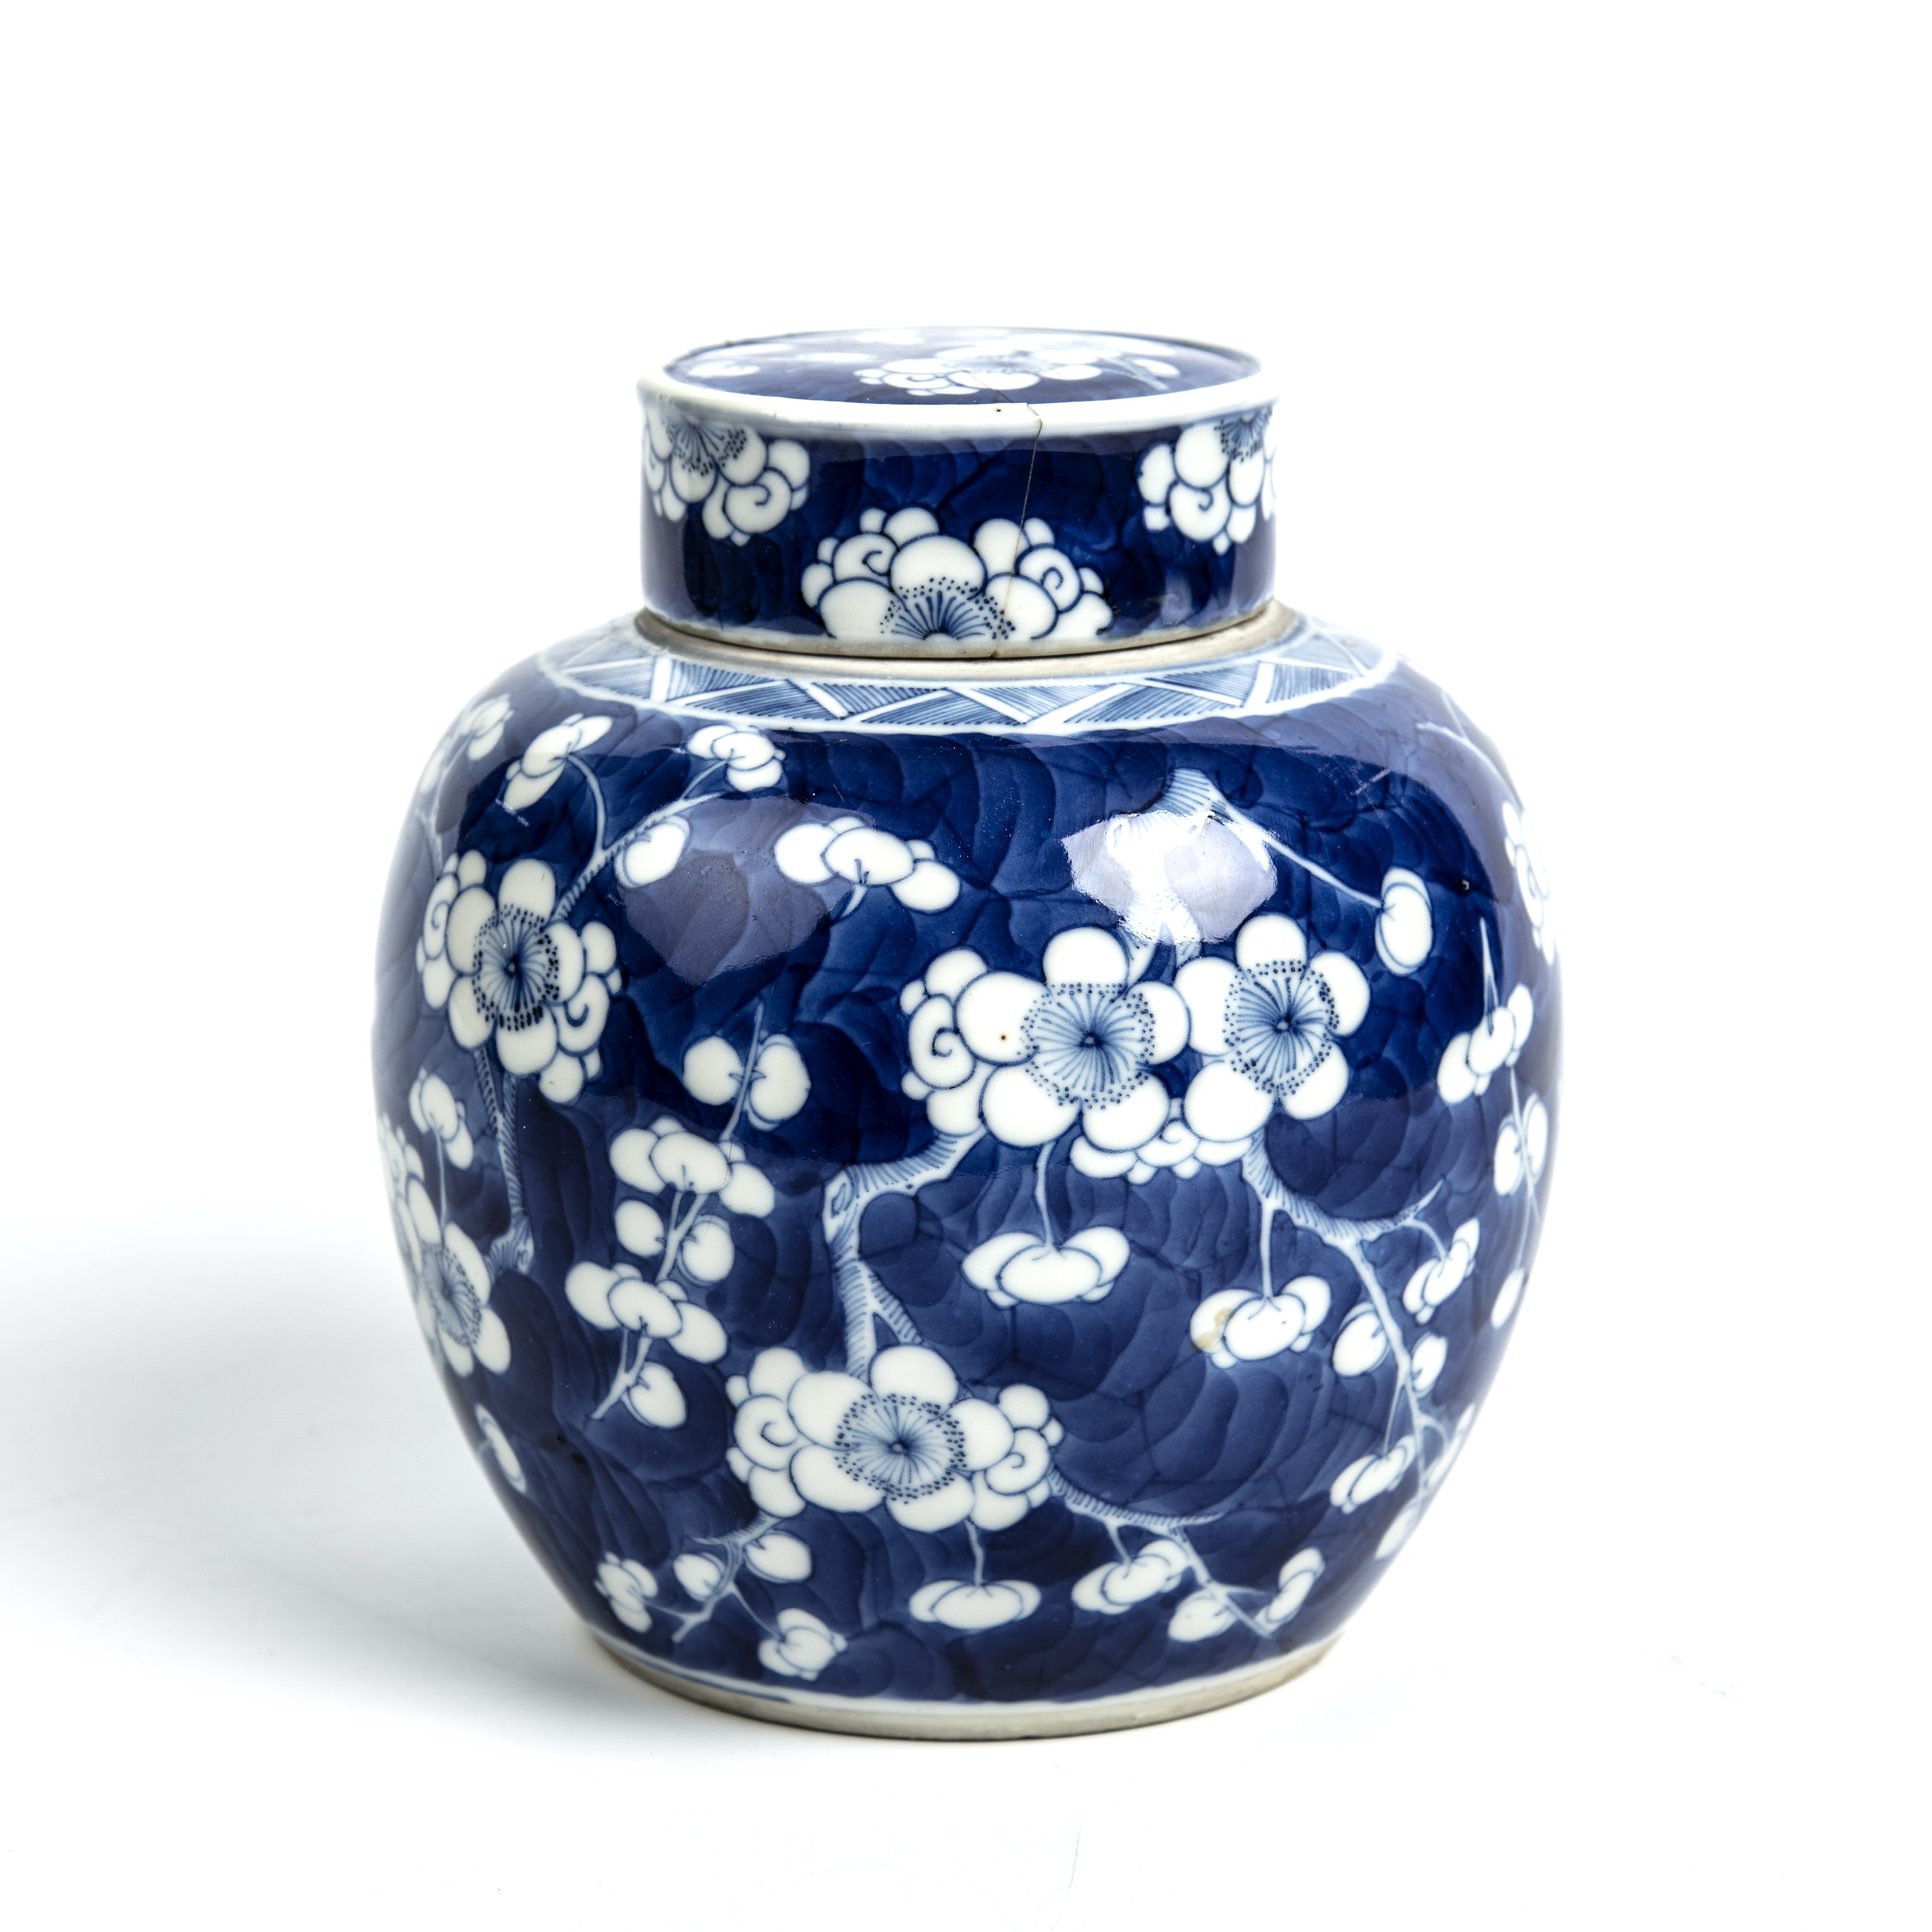 A Chinese ginger jar with blue and white prunus blossom decoration and a six character Qing mark